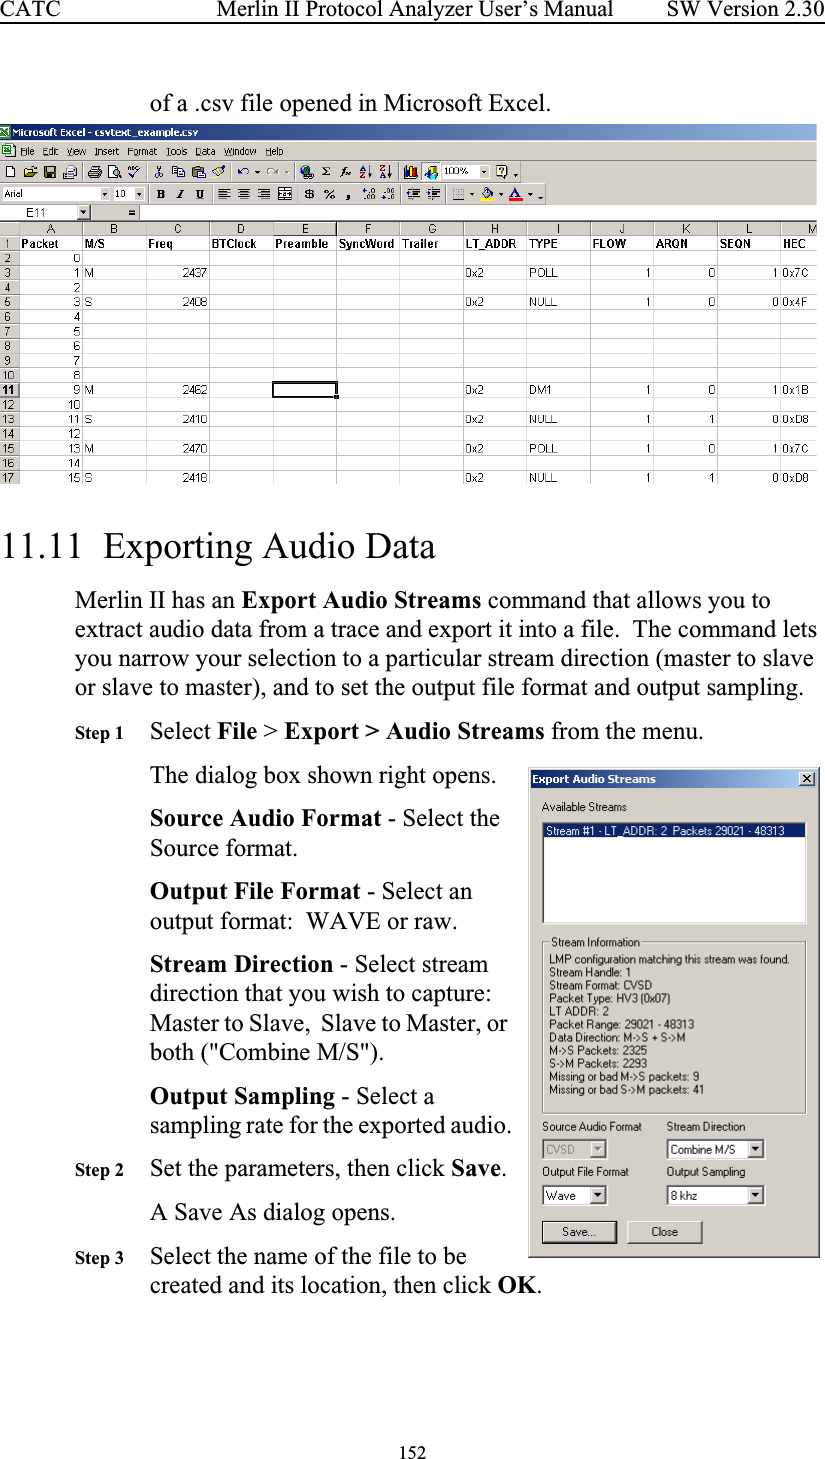 152 Merlin II Protocol Analyzer User’s ManualCATC SW Version 2.30of a .csv file opened in Microsoft Excel.  11.11  Exporting Audio DataMerlin II has an Export Audio Streams command that allows you to extract audio data from a trace and export it into a file.  The command lets you narrow your selection to a particular stream direction (master to slave or slave to master), and to set the output file format and output sampling.Step 1 Select File &gt; Export &gt; Audio Streams from the menu.The dialog box shown right opens.  Source Audio Format - Select the Source format.Output File Format - Select an output format:  WAVE or raw.Stream Direction - Select stream direction that you wish to capture:  Master to Slave,  Slave to Master, or both (&quot;Combine M/S&quot;).Output Sampling - Select a sampling rate for the exported audio.Step 2 Set the parameters, then click Save.A Save As dialog opens. Step 3 Select the name of the file to be created and its location, then click OK.